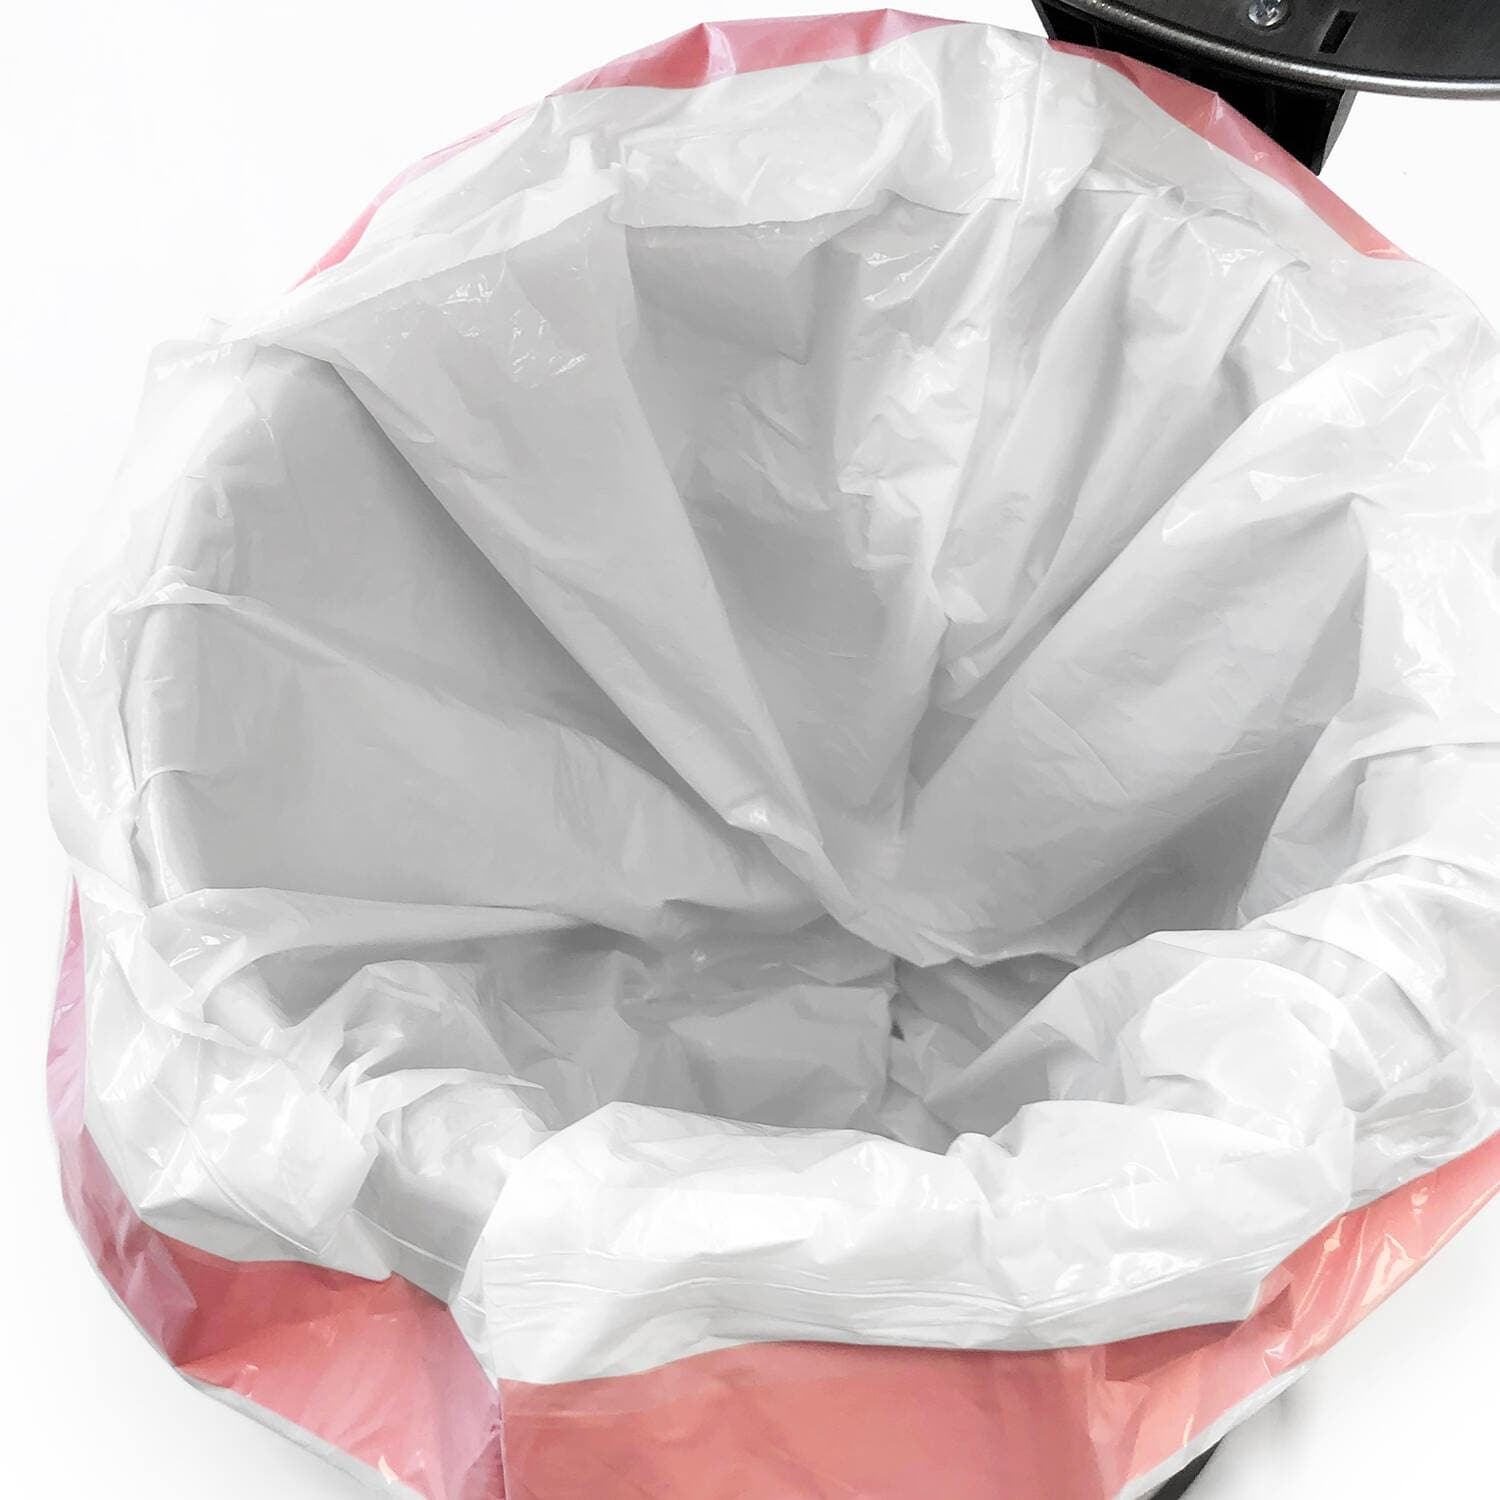 https://ak1.ostkcdn.com/images/products/is/images/direct/c563a4af45e0c2a56d3cce2fc6b2cd0dba63fb01/Drawstring-Trash-Bags%2C-40-Liter---10.5-Gallon%2C-30-Count.jpg